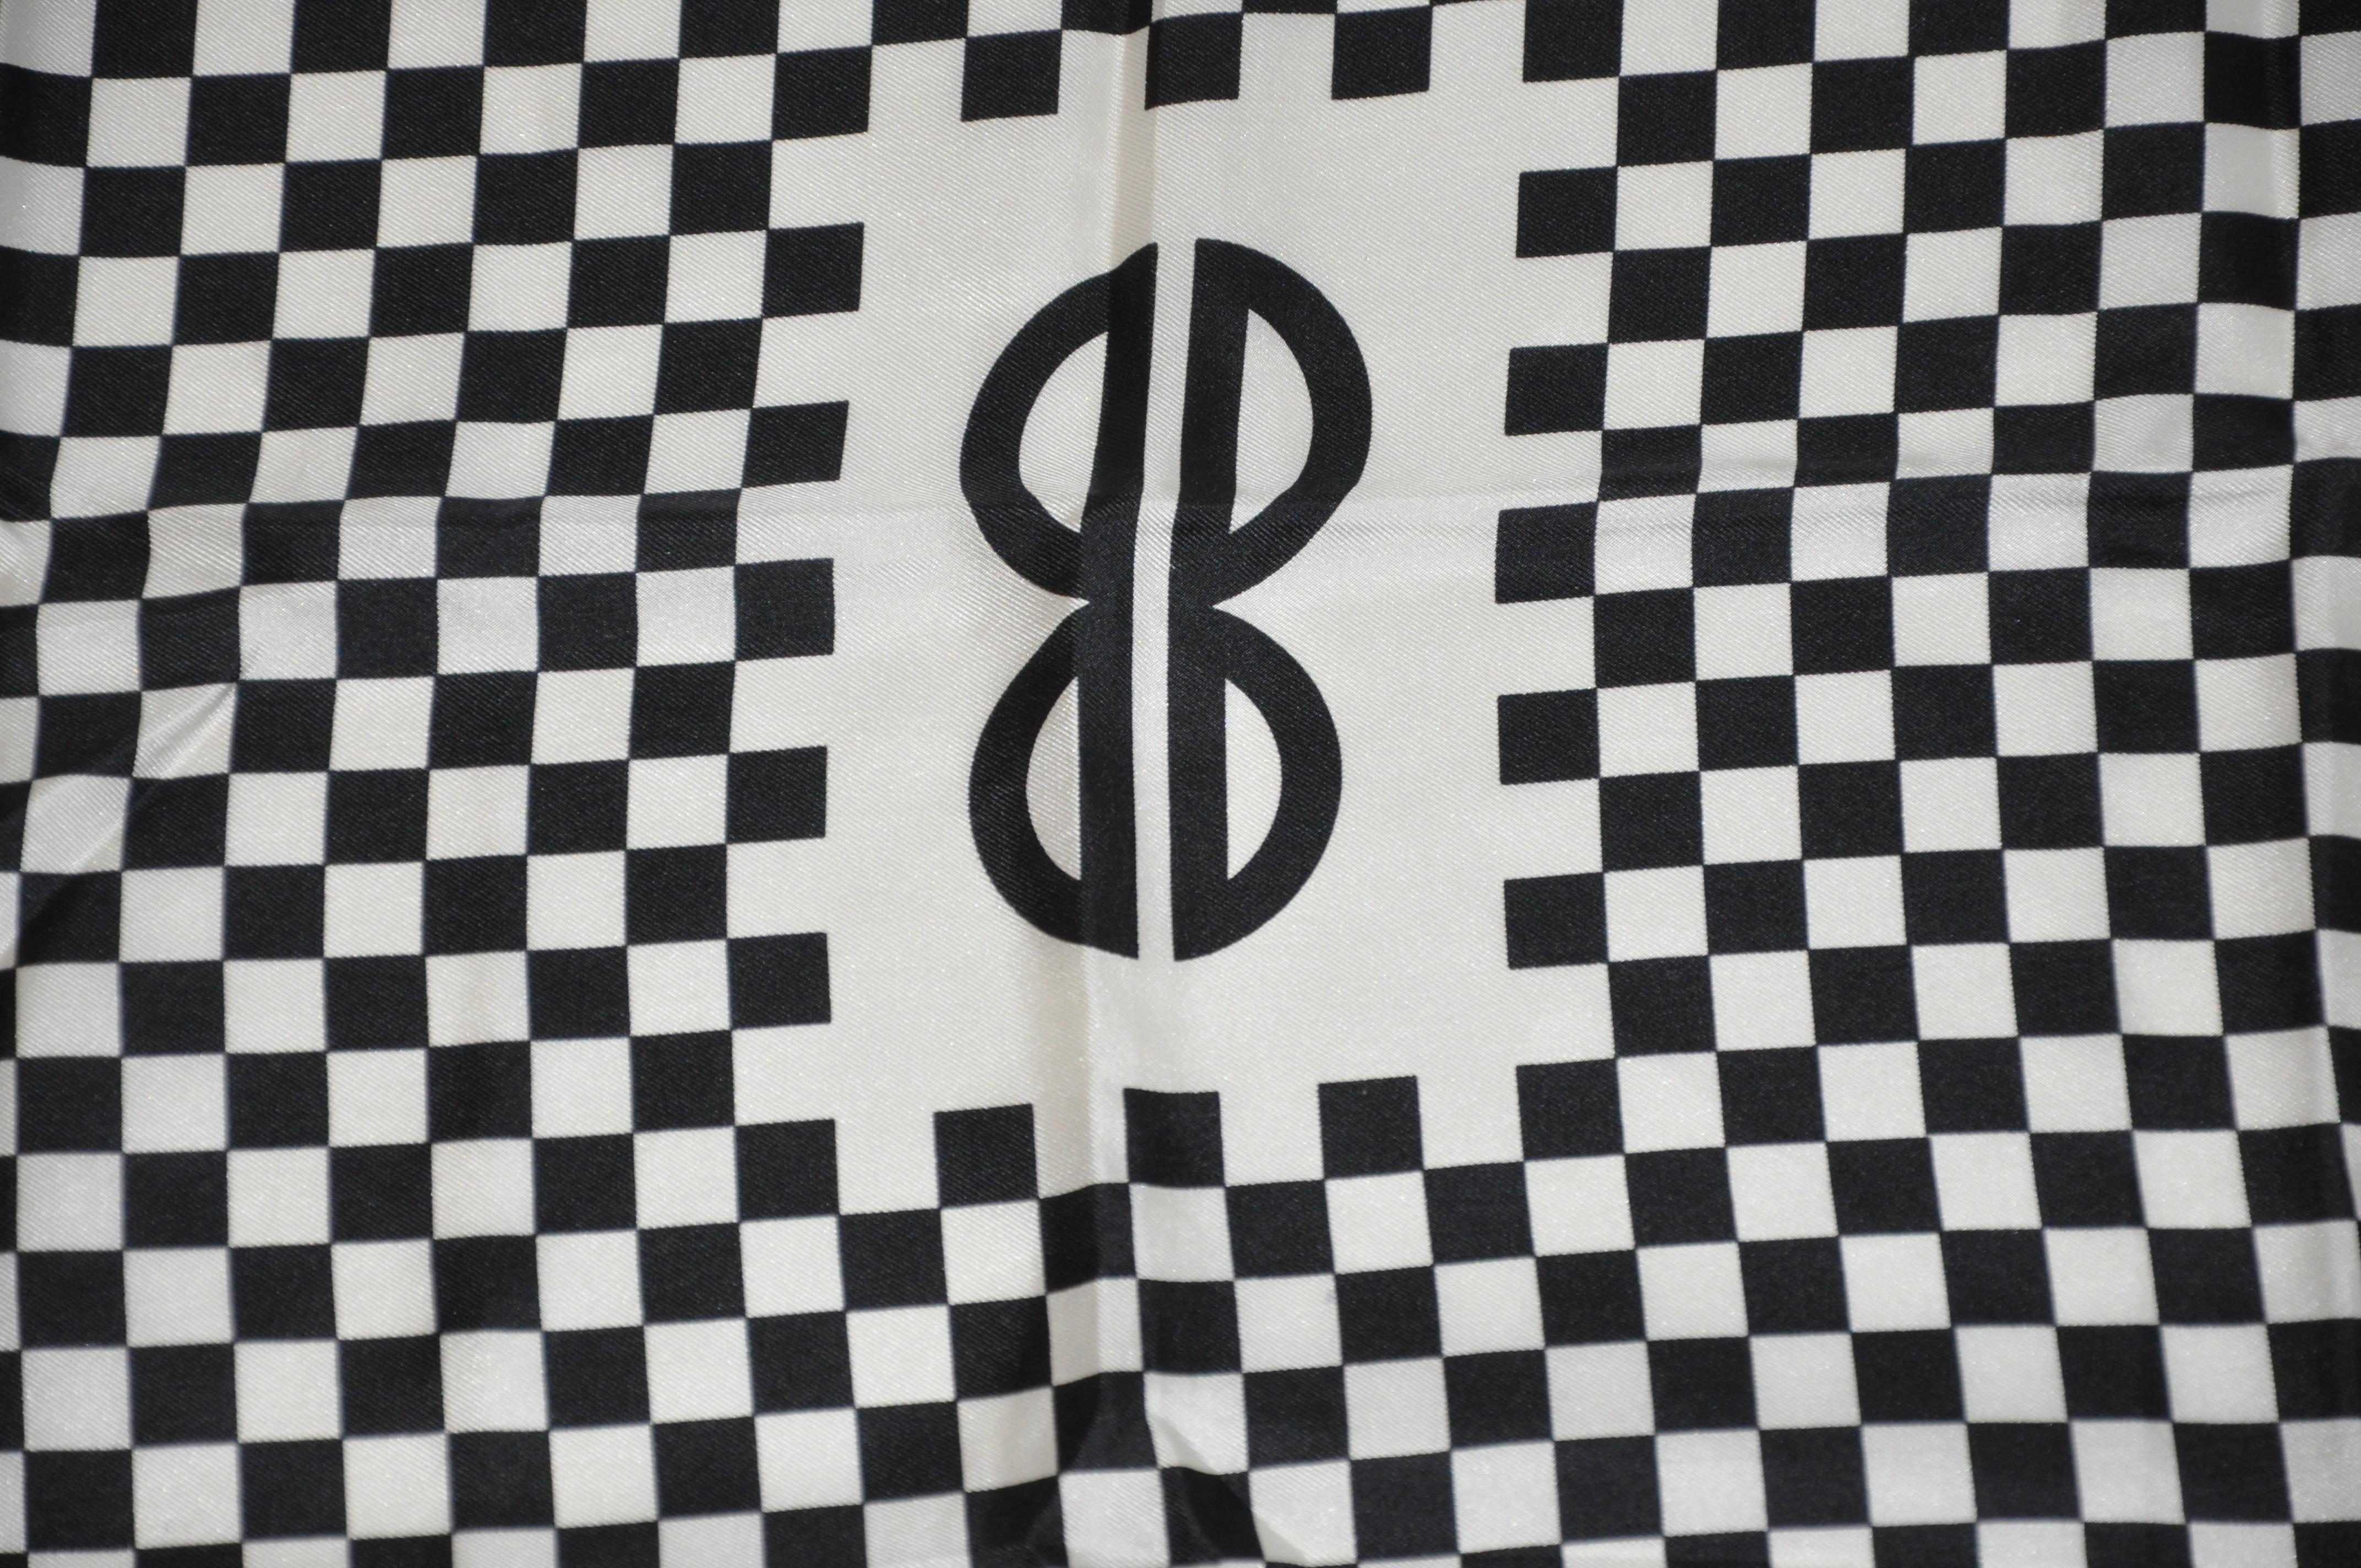        Iconic Bill Blass black & White checkered signature logo silk scarf measures 23 inches by 23 inches, with hand-rolled edges. Made in Italy.